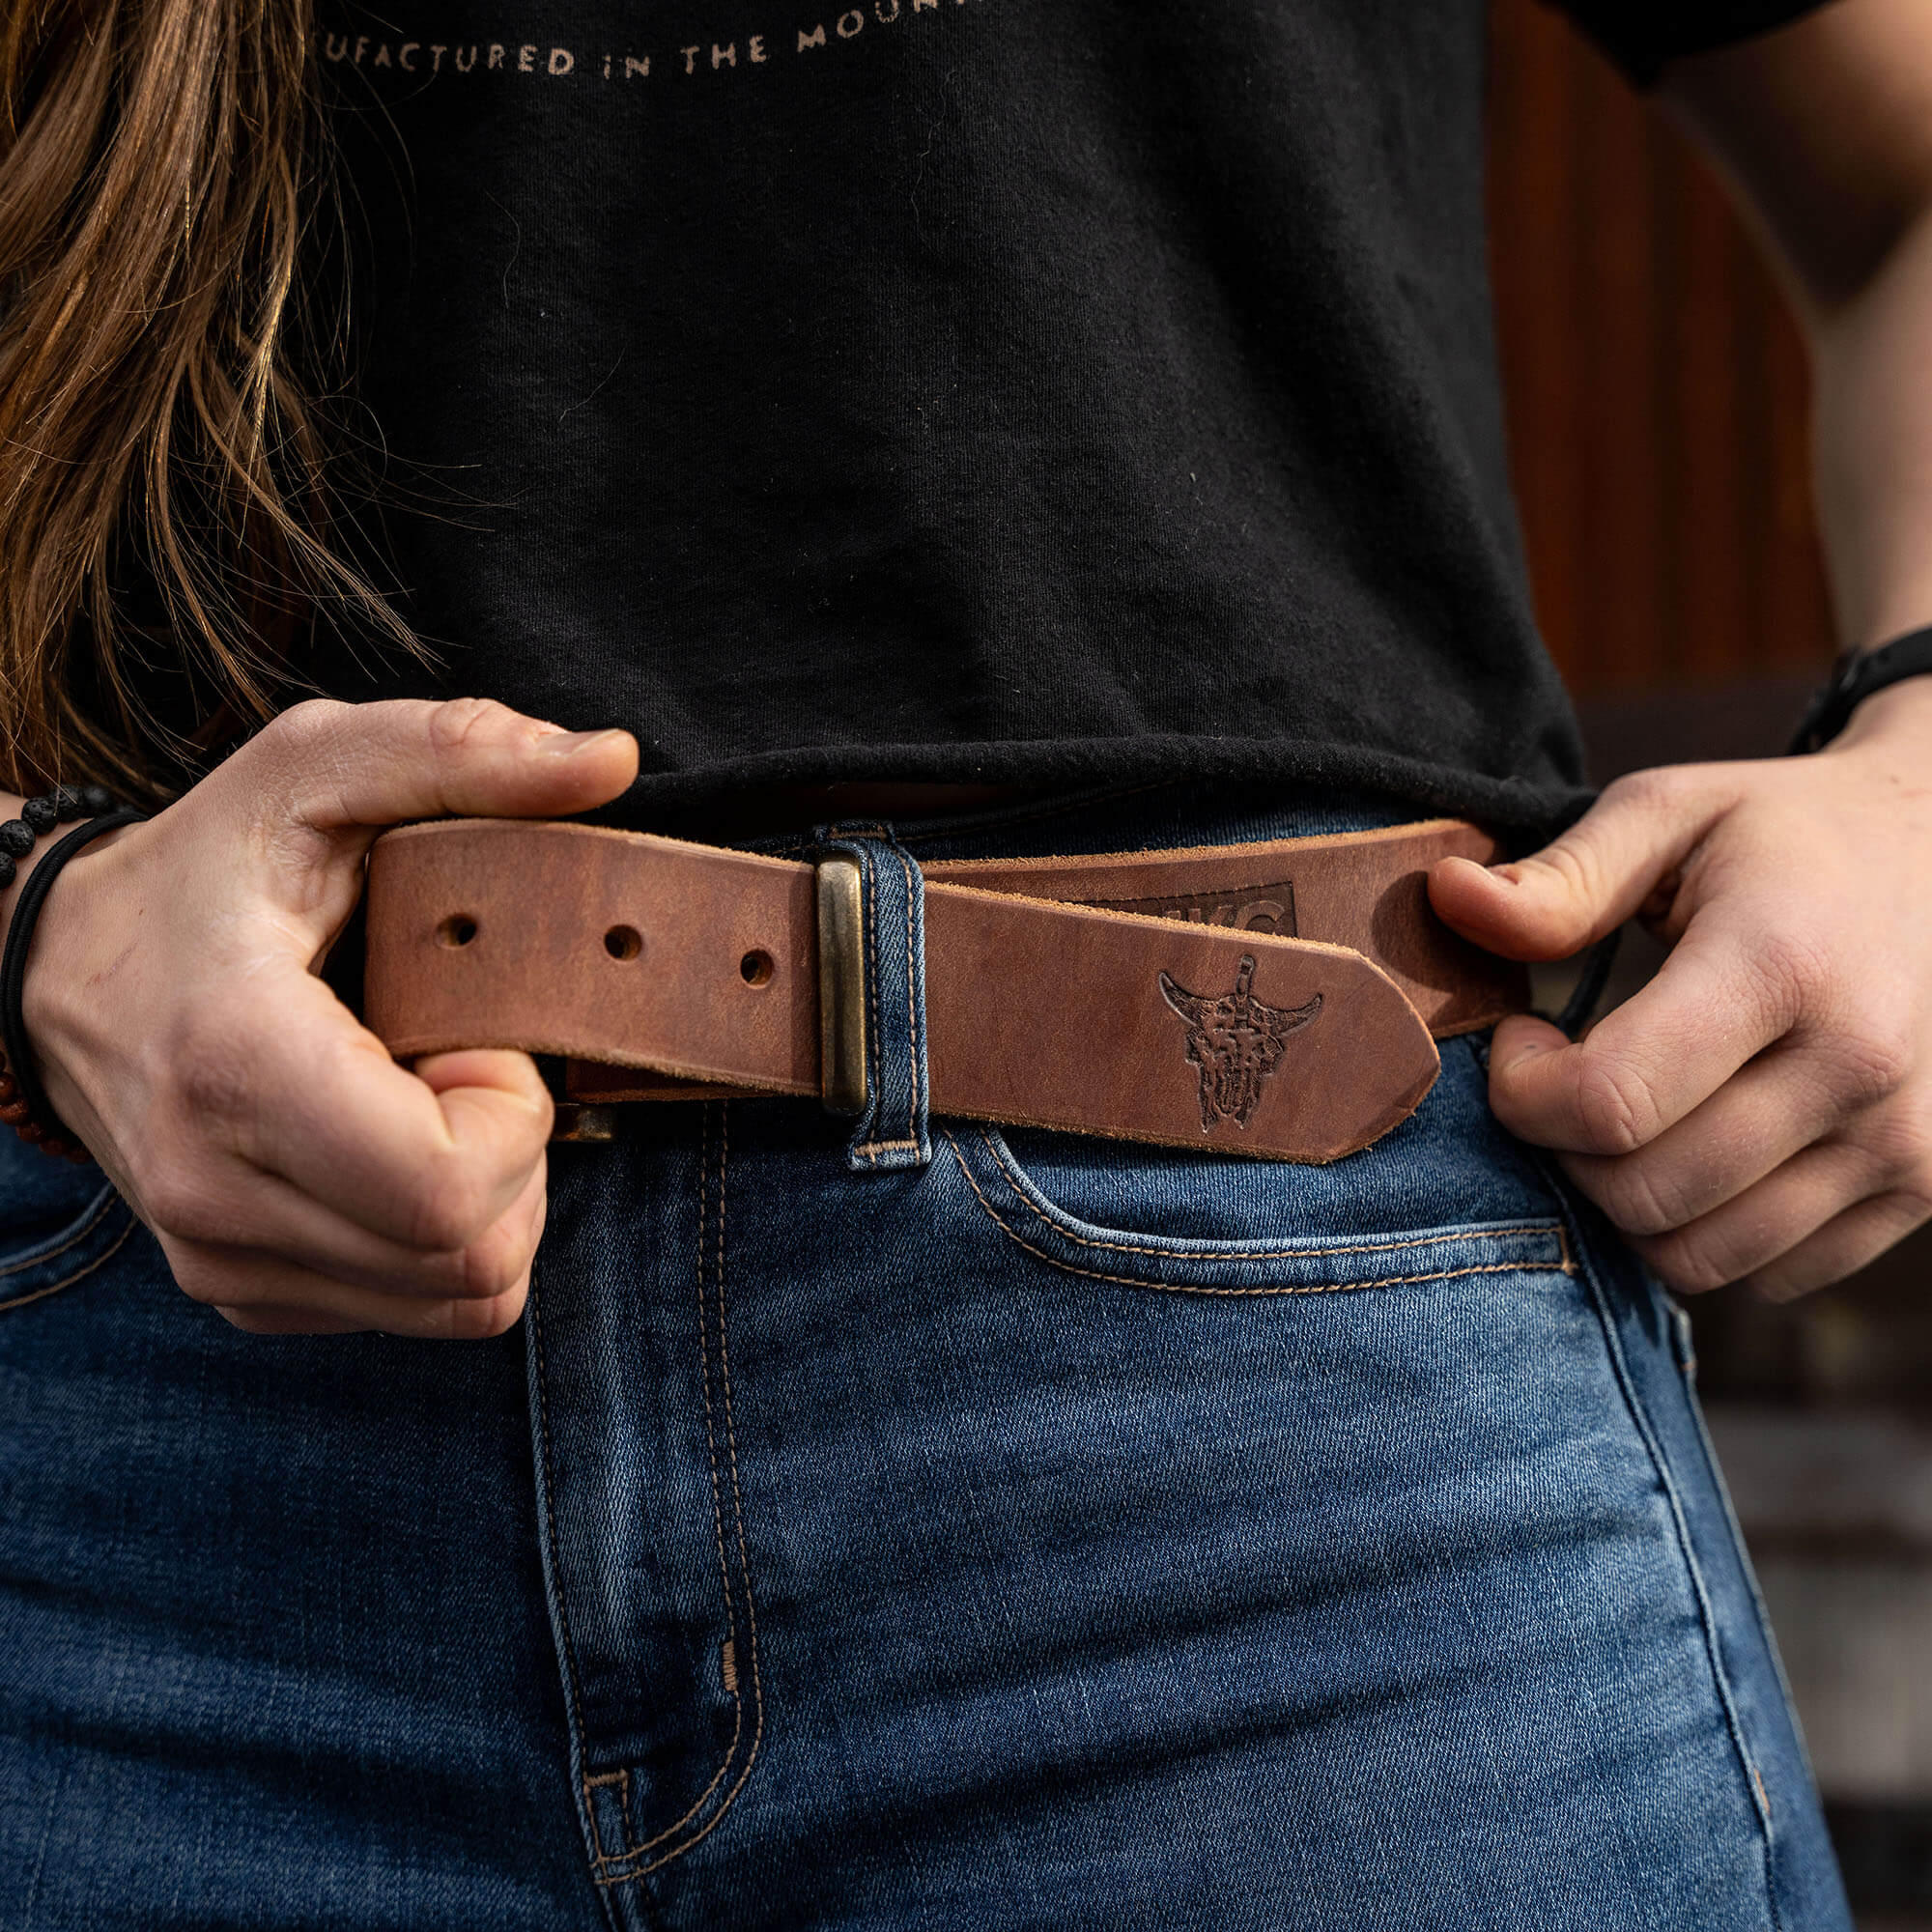 MKC LEATHER BELT - BROWN - USA MADE